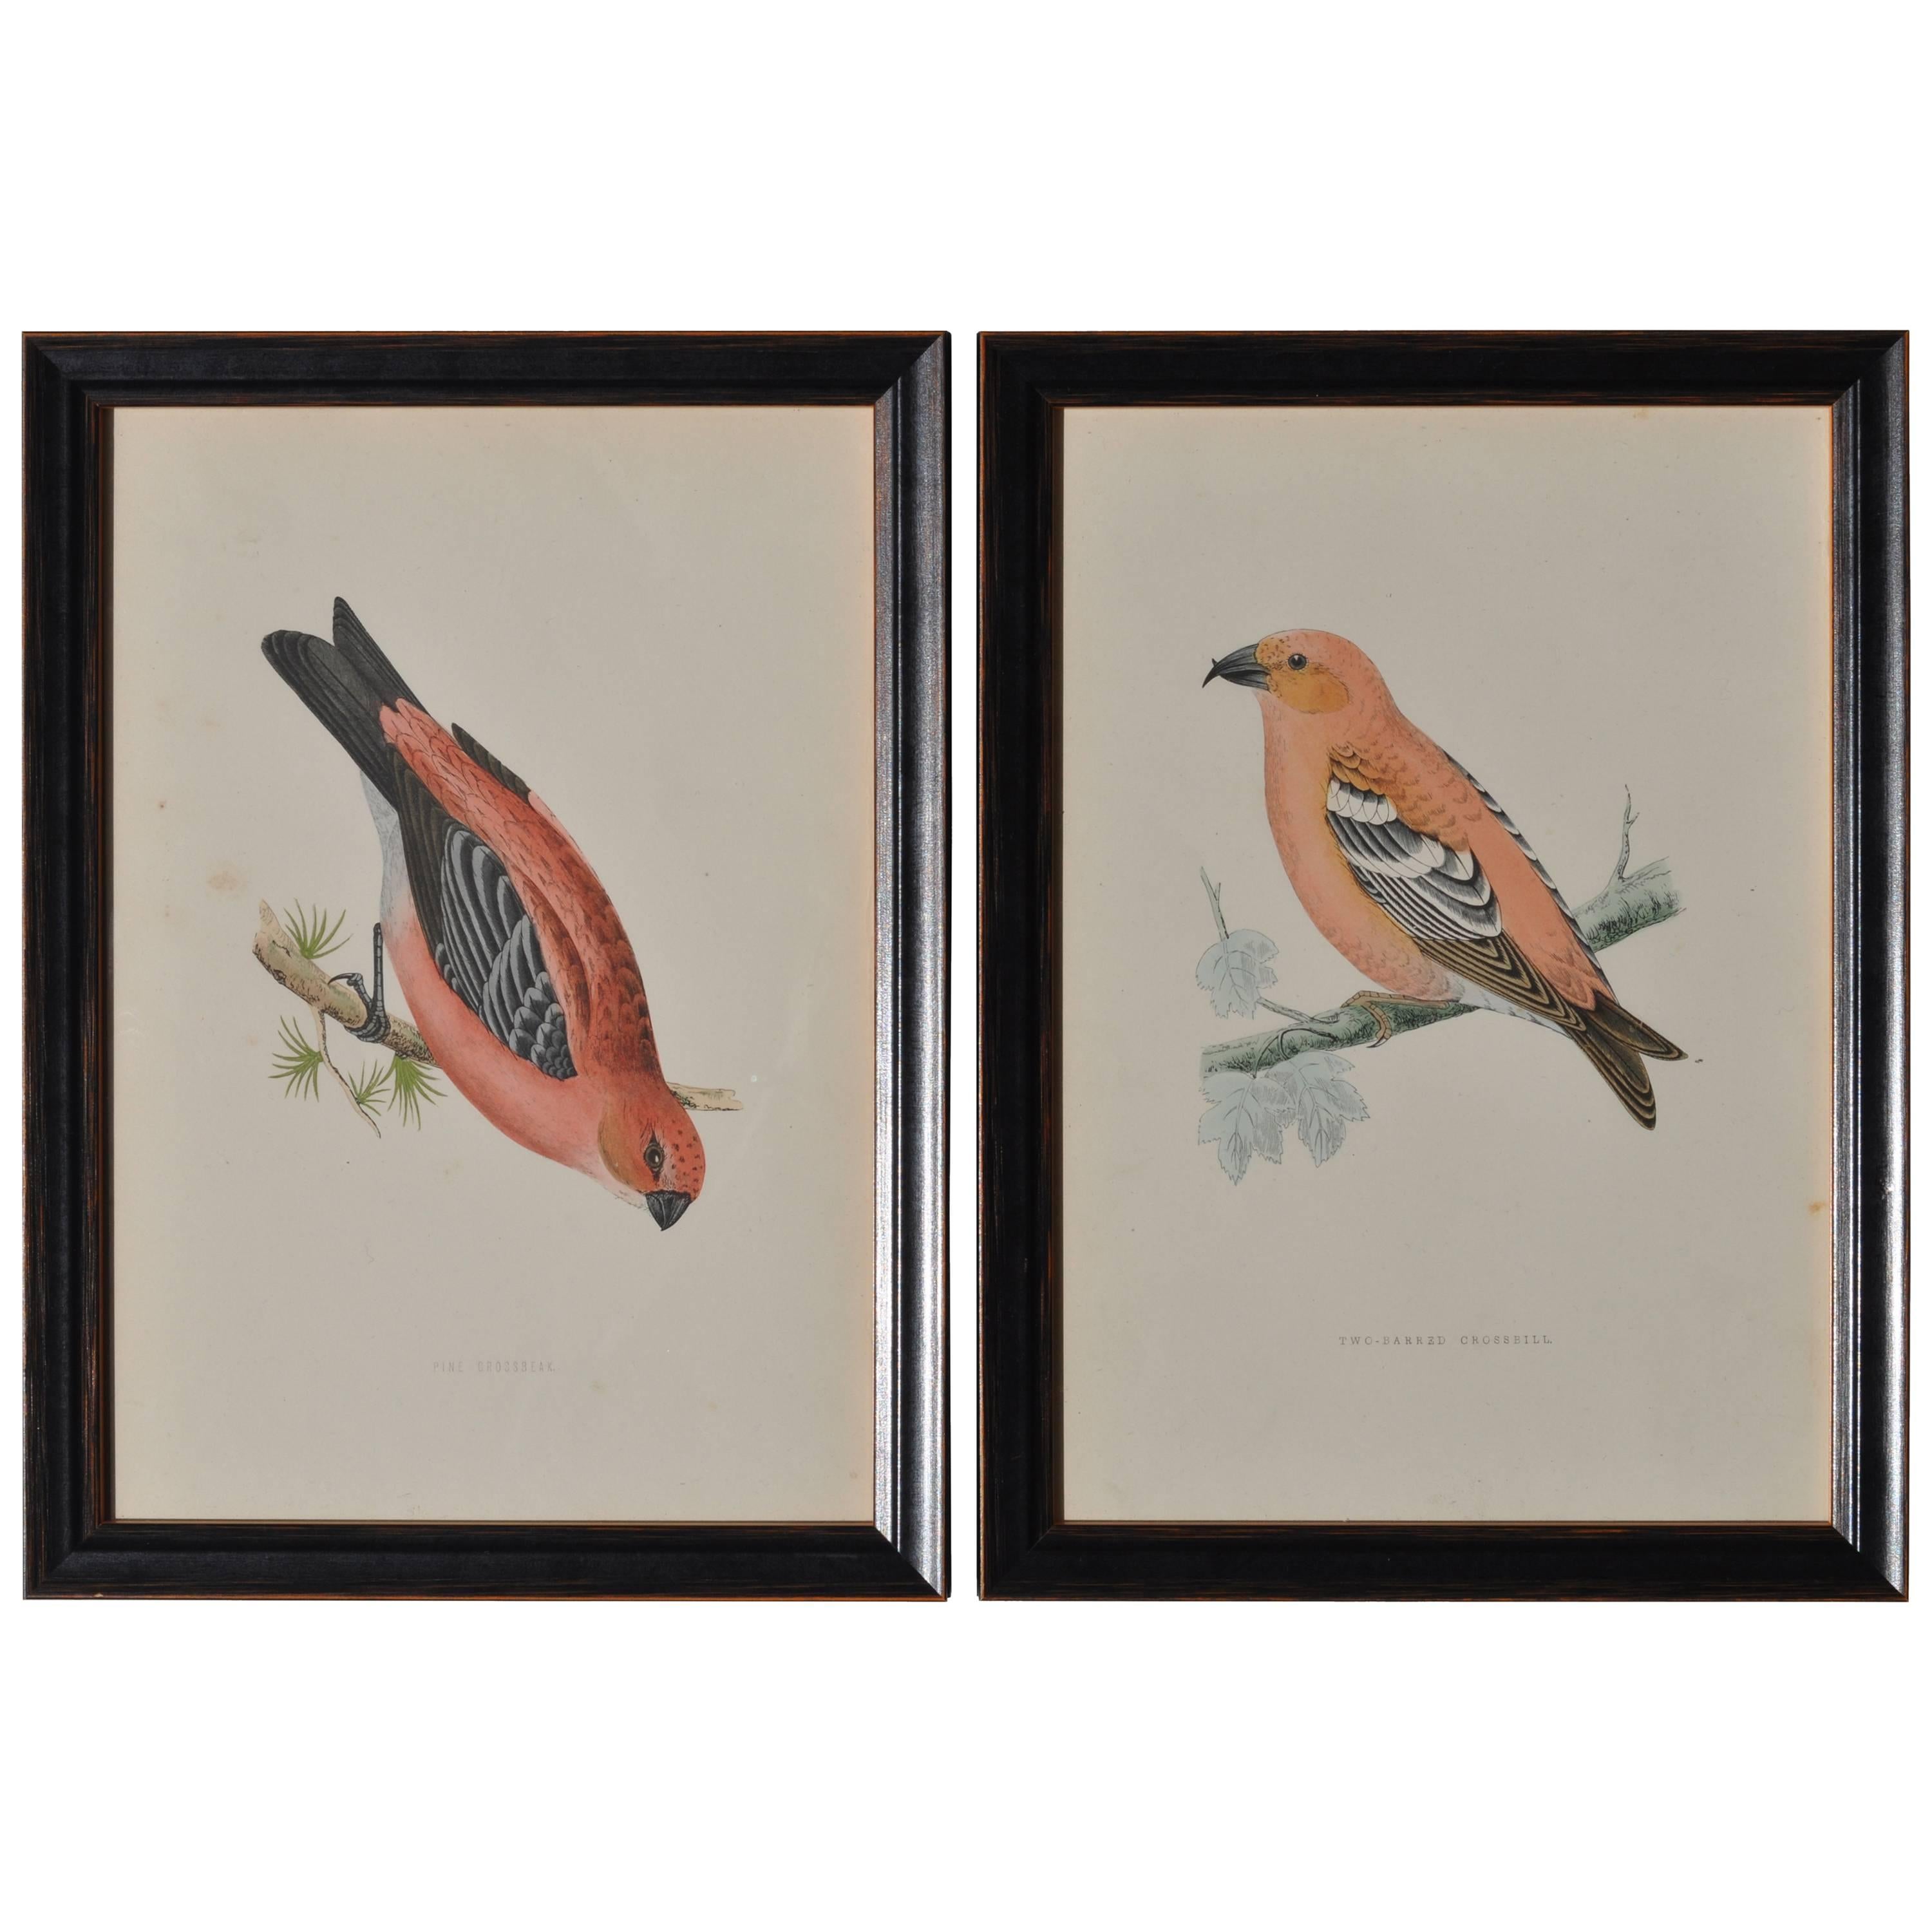 Antique Hand Colored Framed Engravings of Pink British Birds from the 1800s For Sale